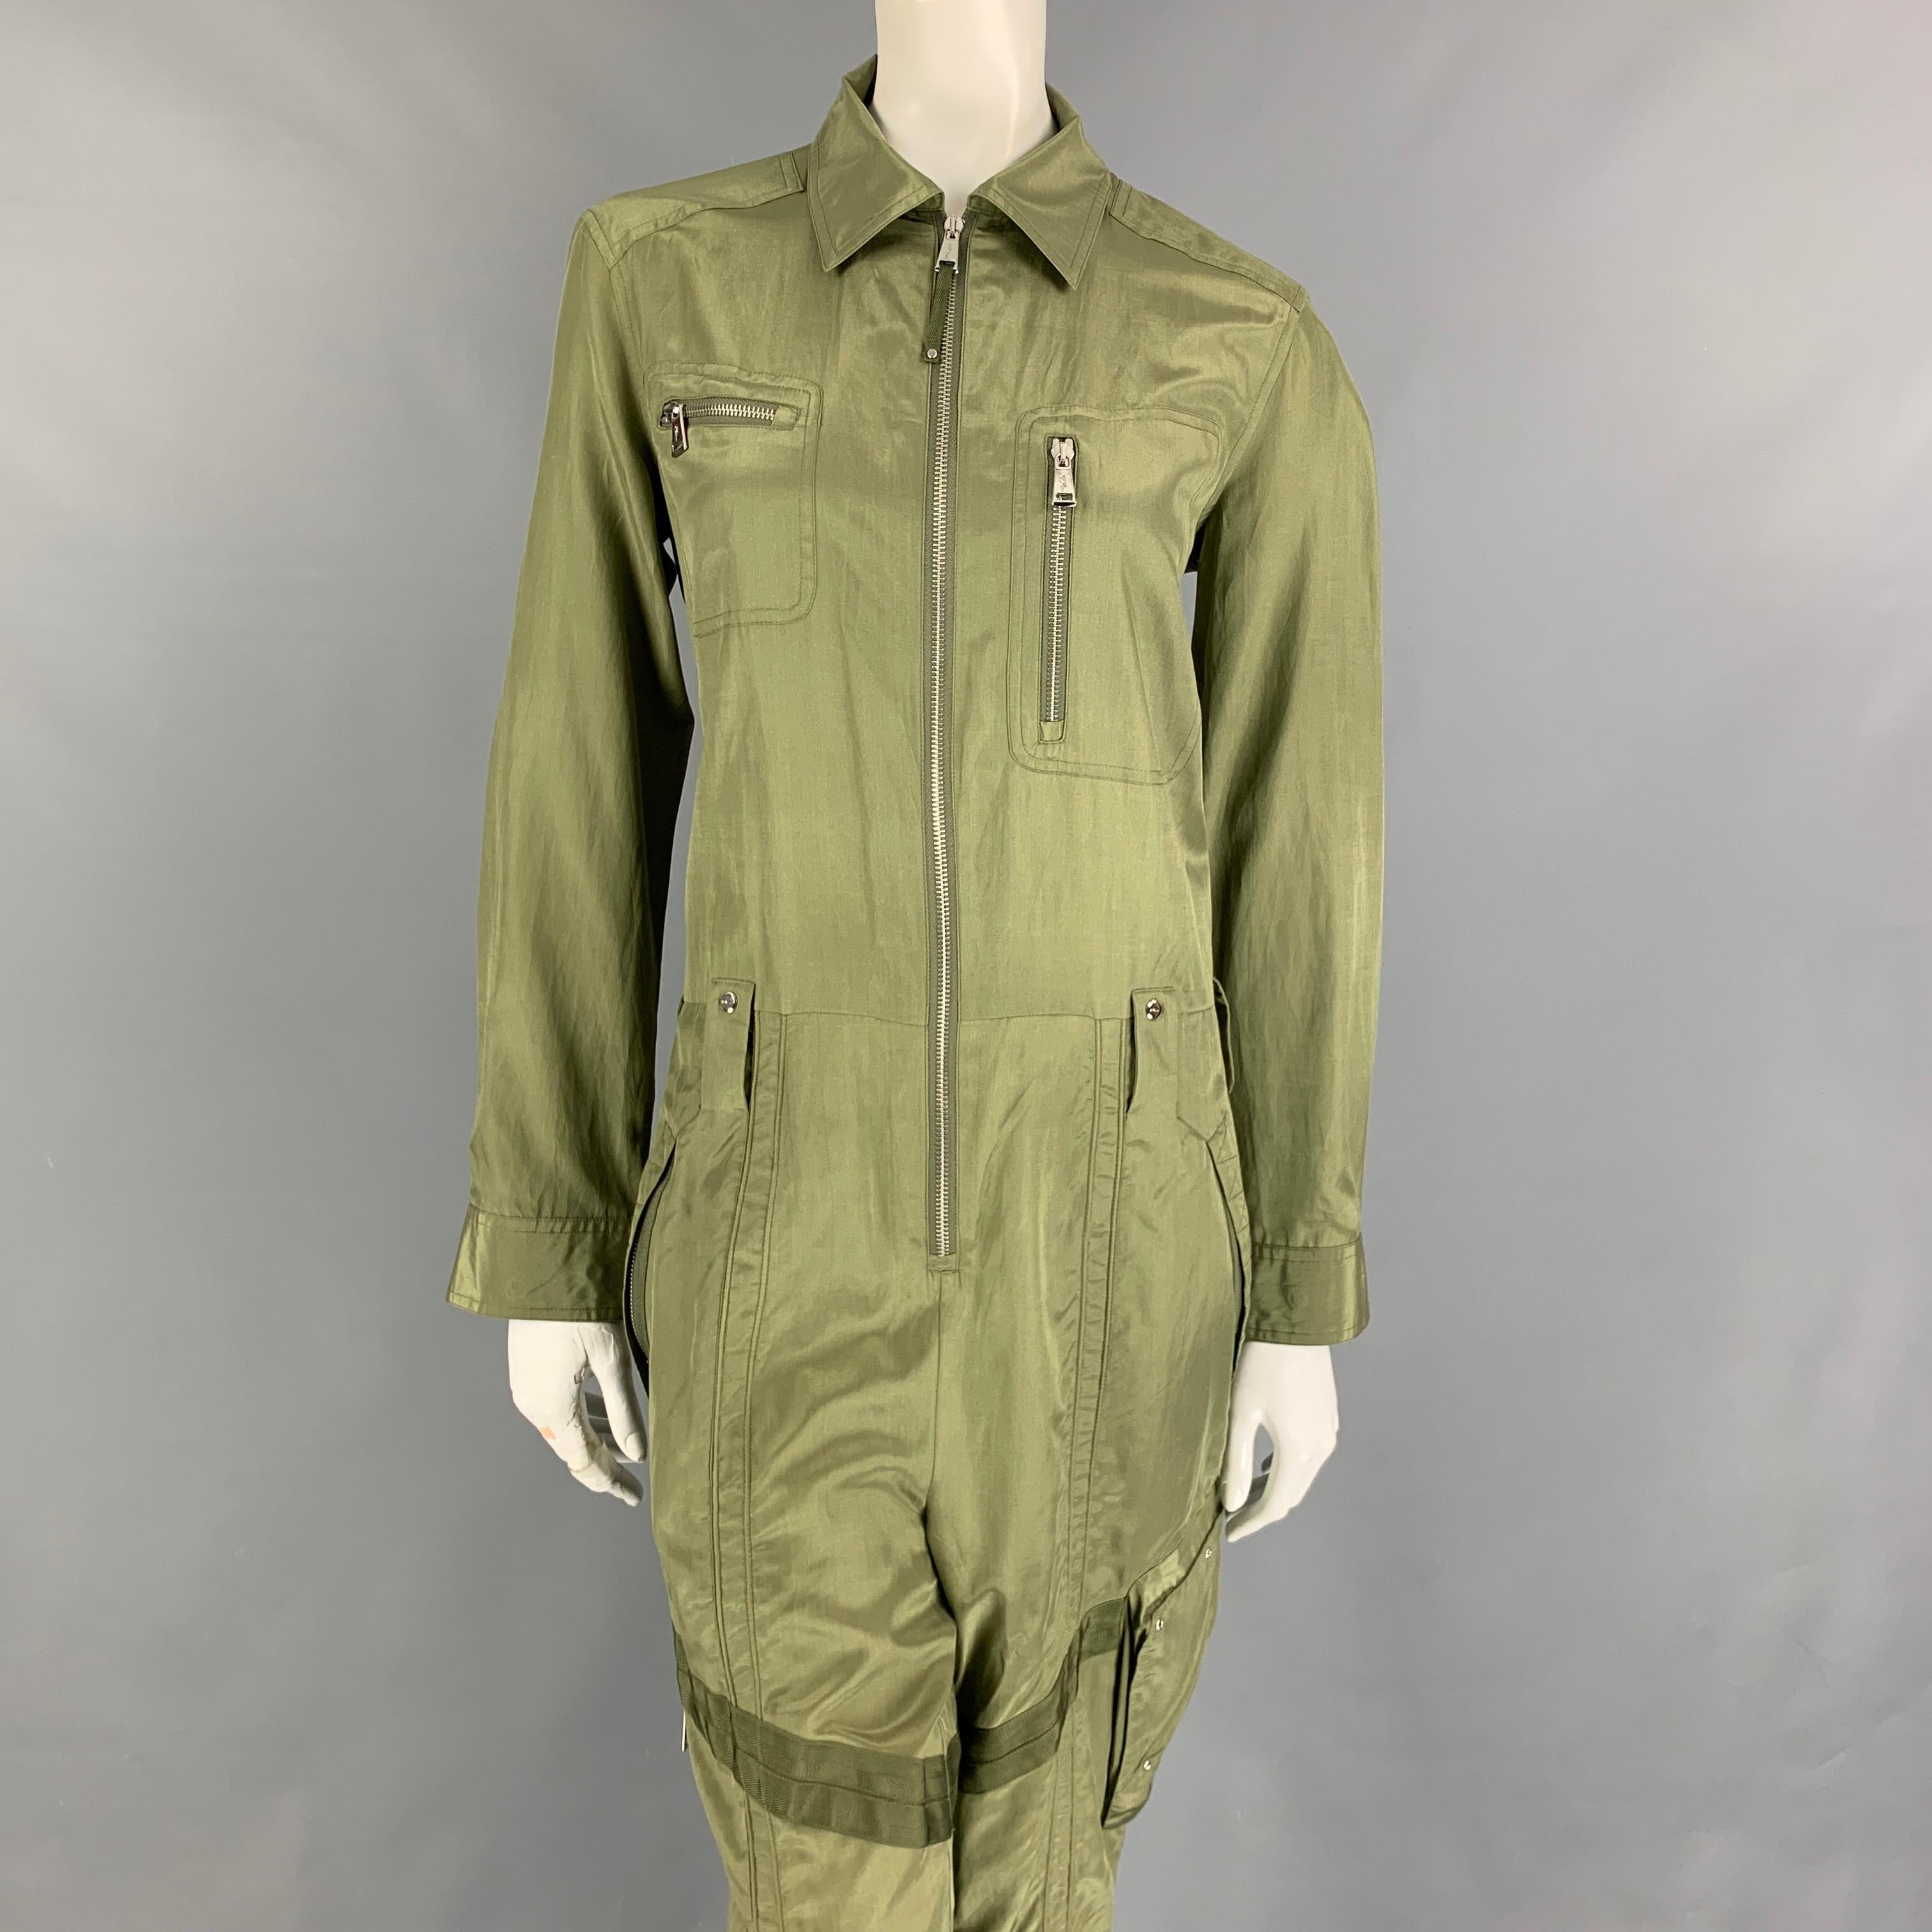 POLO by RALPH LAUREN jumpsuit comes in a moss silk / cotton featuring silver tone hardware, front zippers, long sleeves, spread collar, and a zip up closure. 

Very Good Pre-Owned Condition.
Marked: 8

Measurements:

Shoulder: 17 in.
Bust: 40